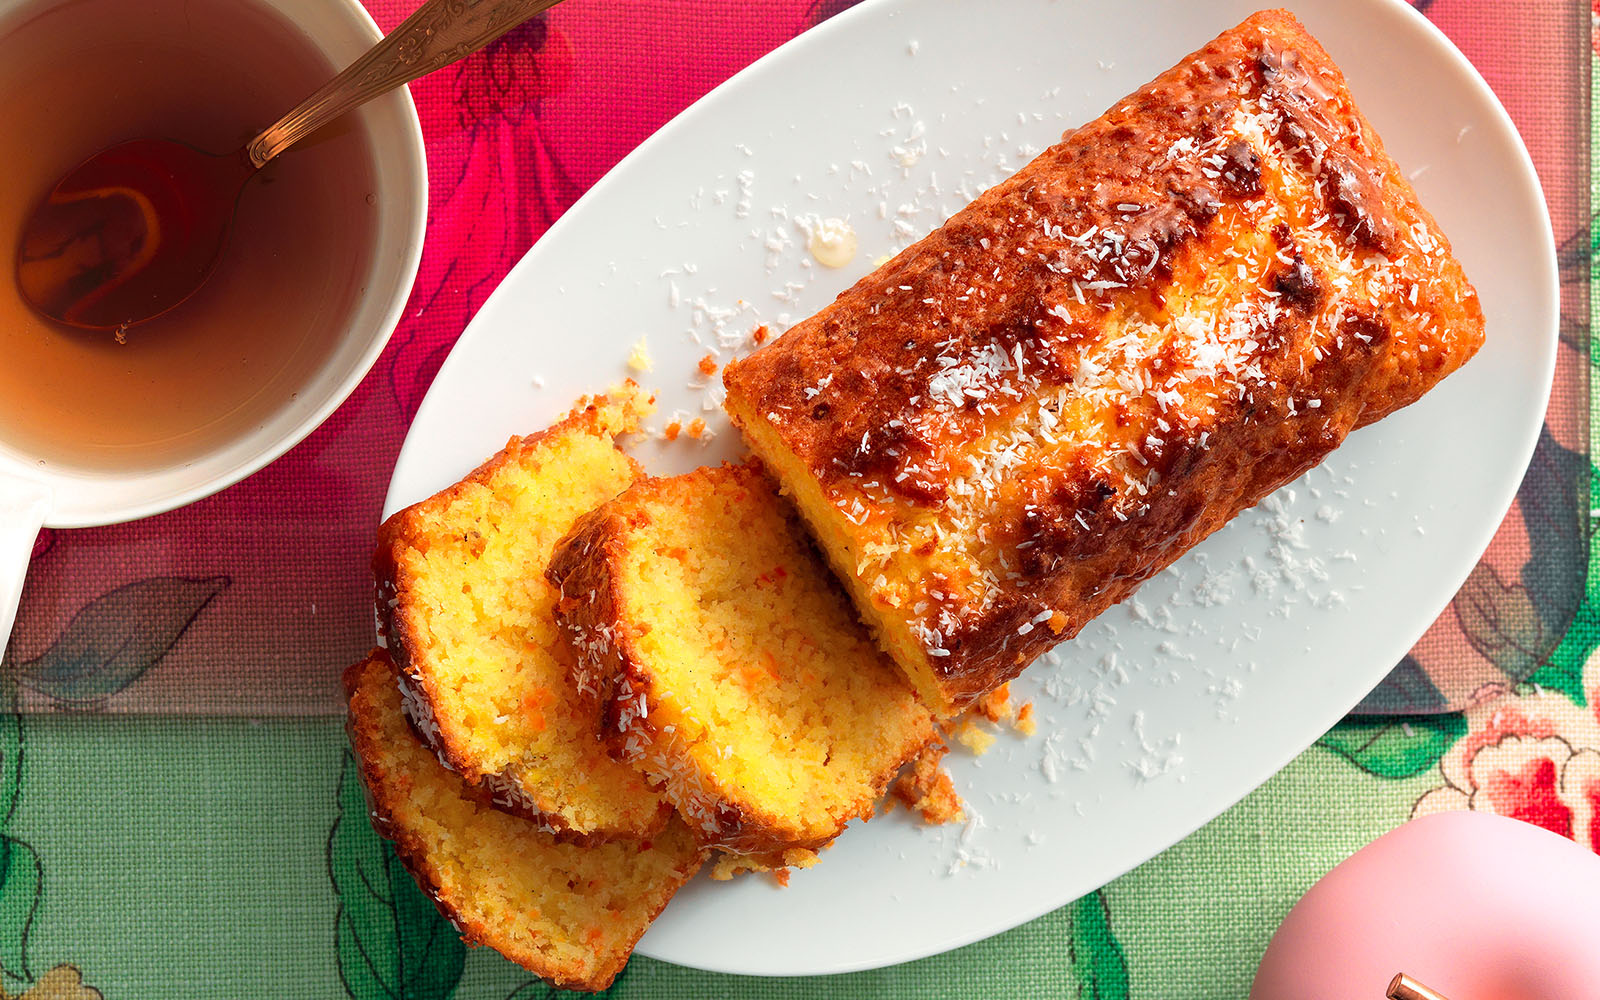 Plum cake recipe with carrots, apples and coconut